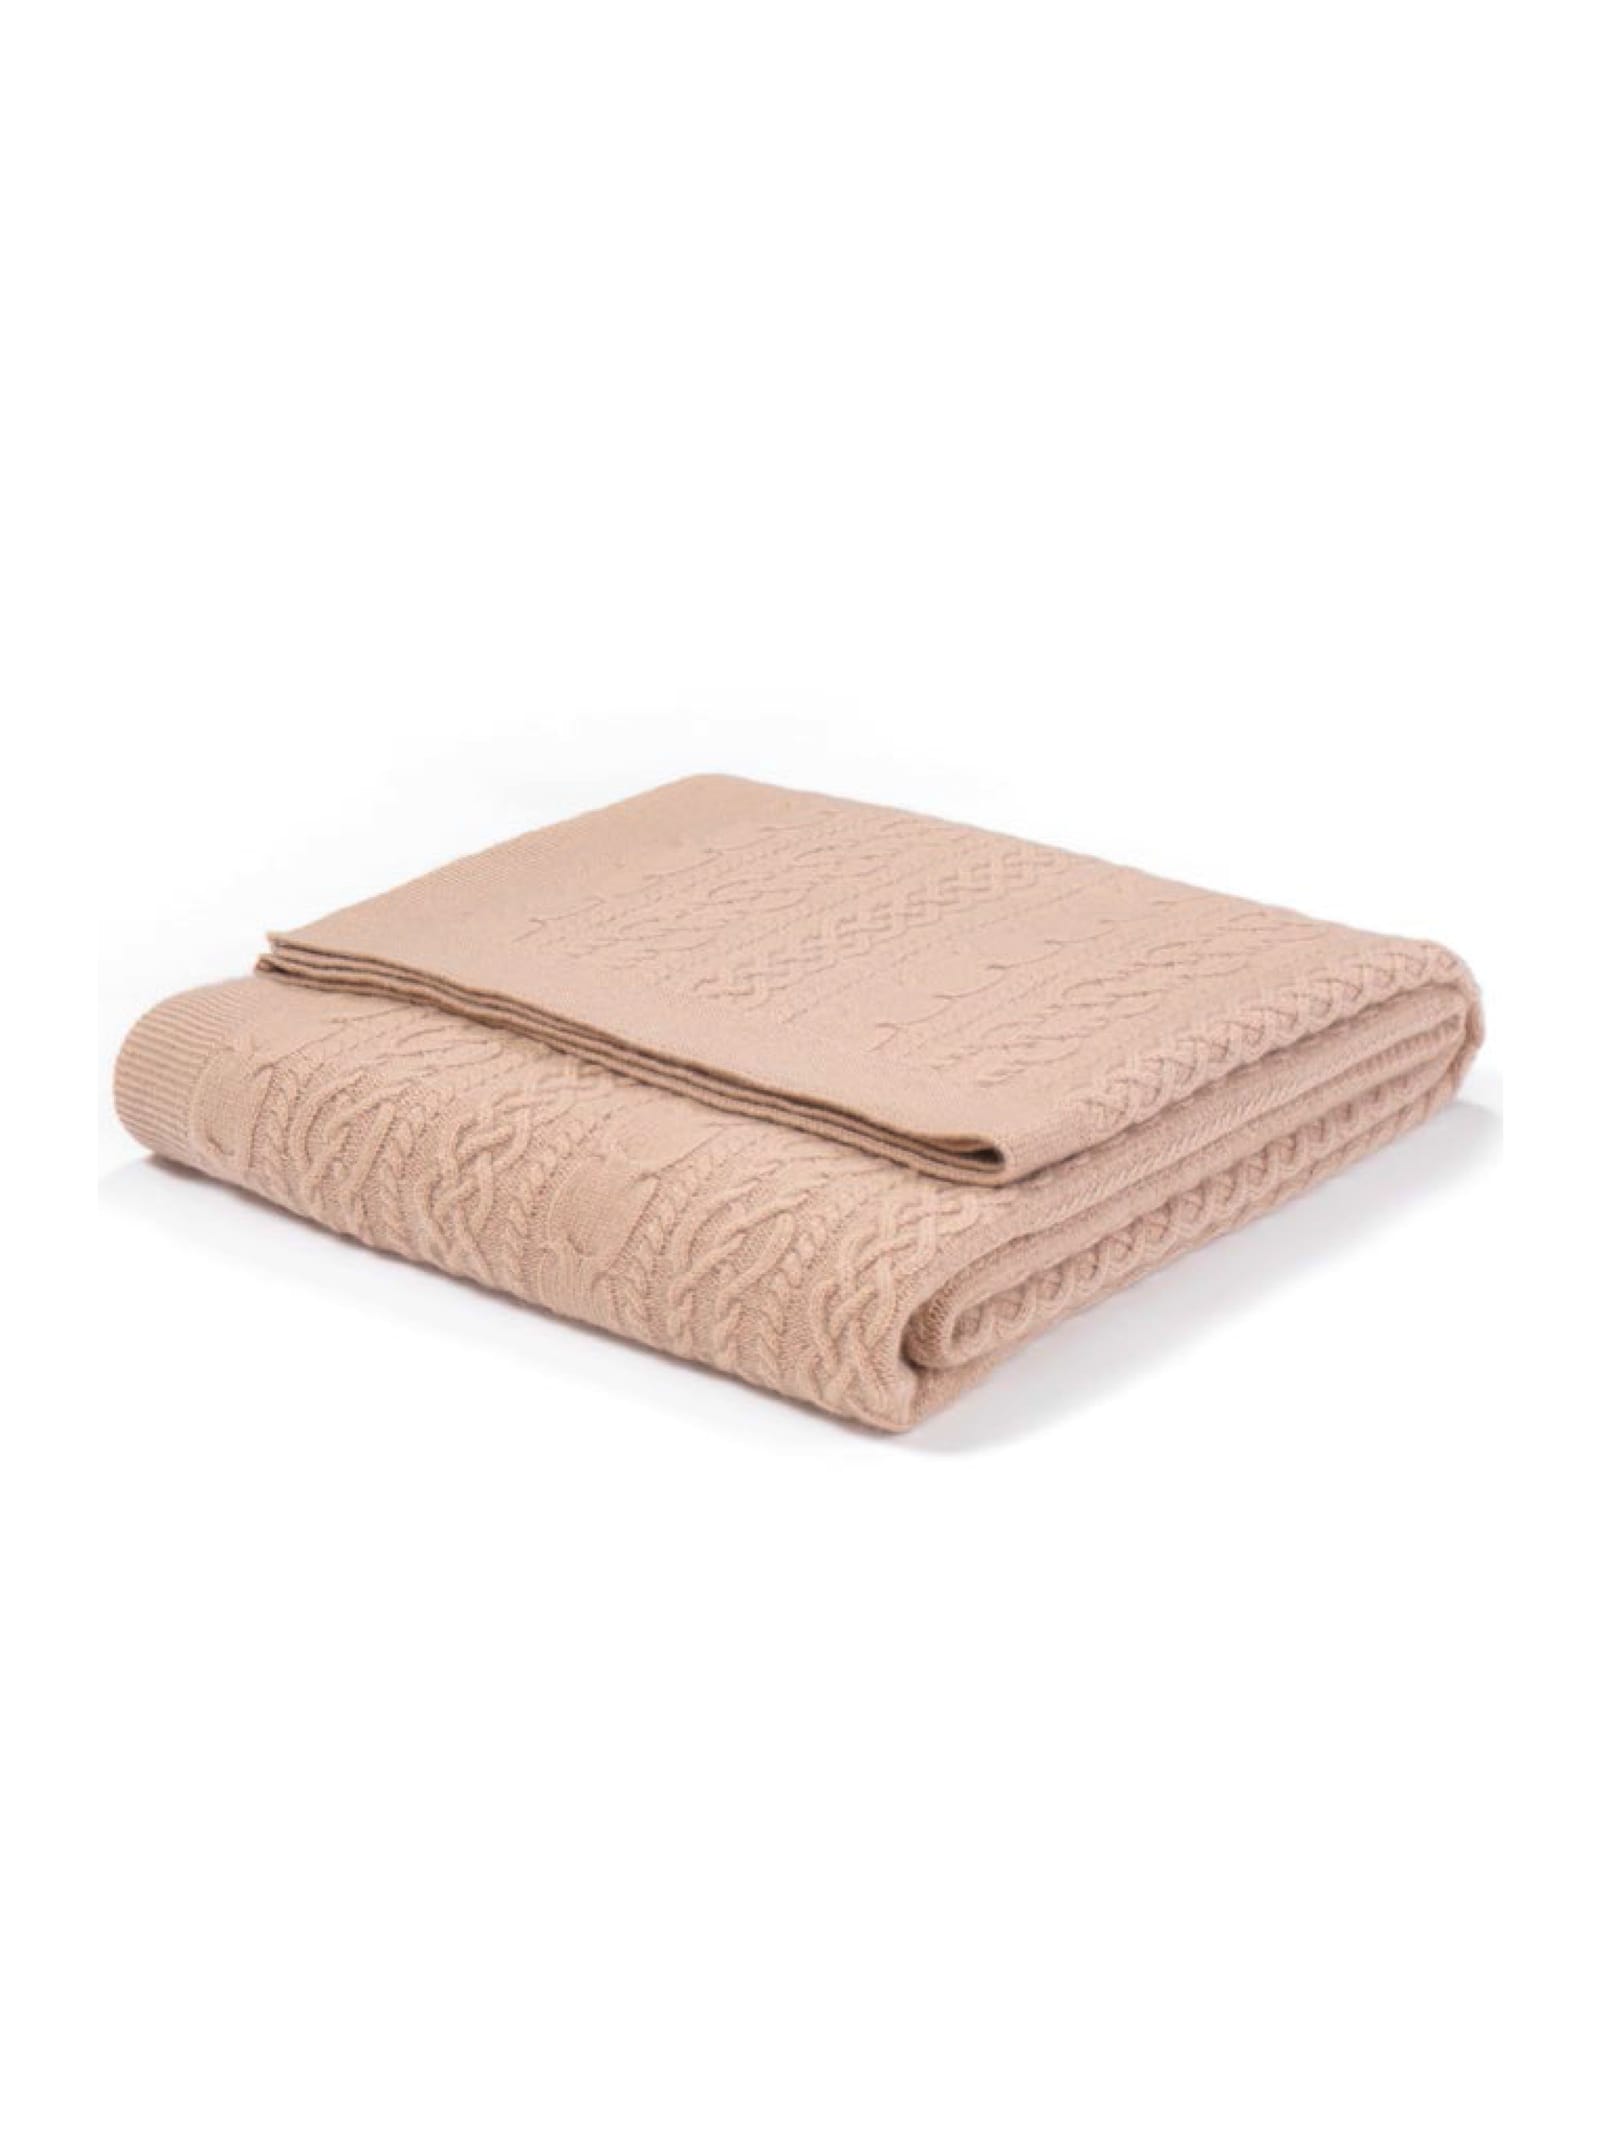 CABLE CASHMERE BLANKET